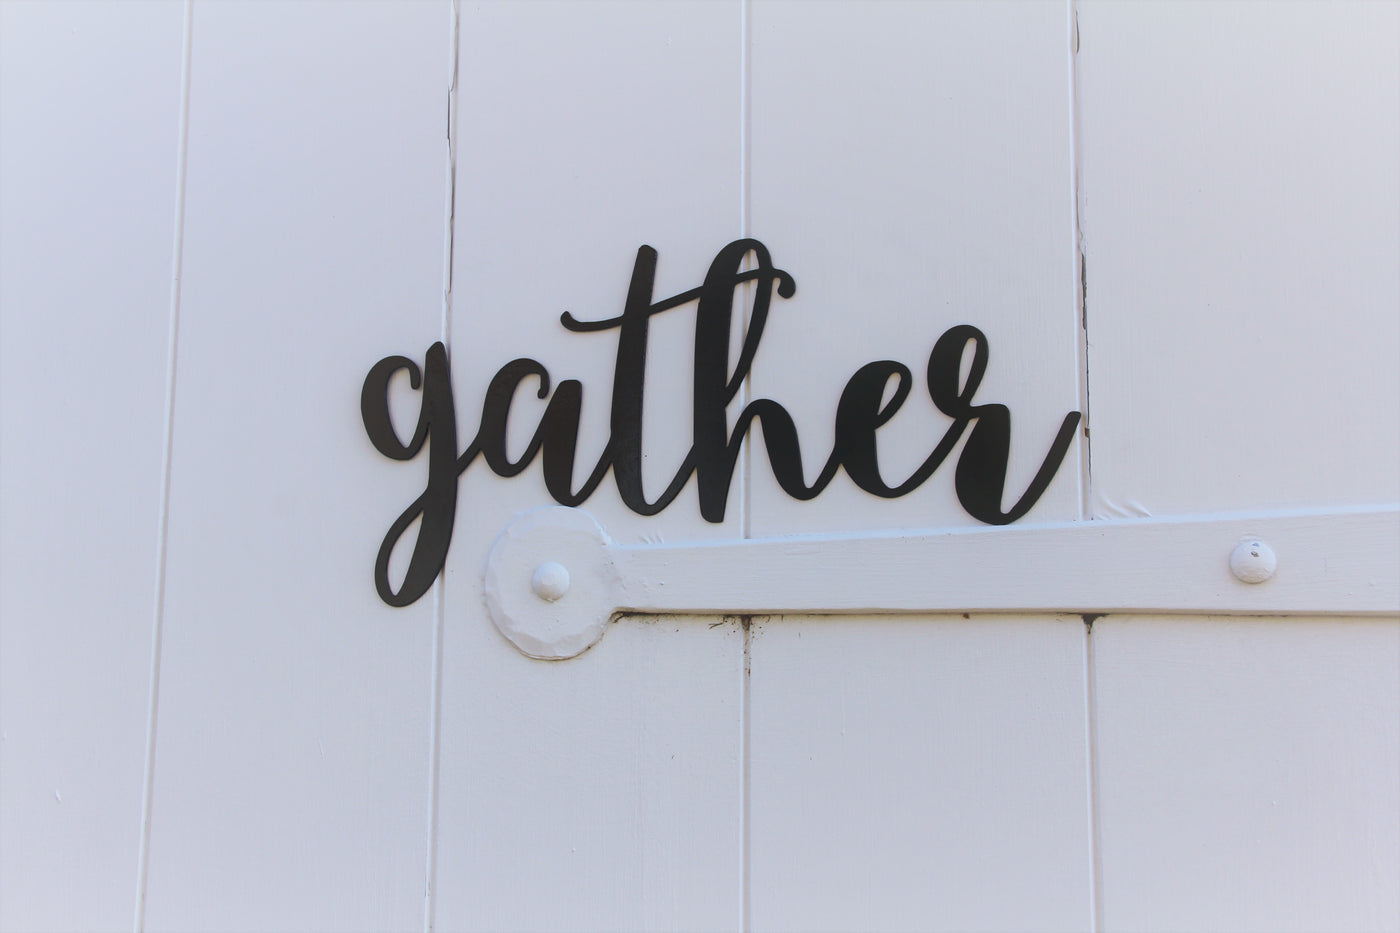 gather Cursive Metal Word Sign - Madison Iron and Wood - Metal Art - metal outdoor decor - Steel deocrations - american made products - veteran owned business products - fencing decorations - fencing supplies - custom wall decorations - personalized wall signs - steel - decorative post caps - steel post caps - metal post caps - brackets - structural brackets - home improvement - easter - easter decorations - easter gift - easter yard decor